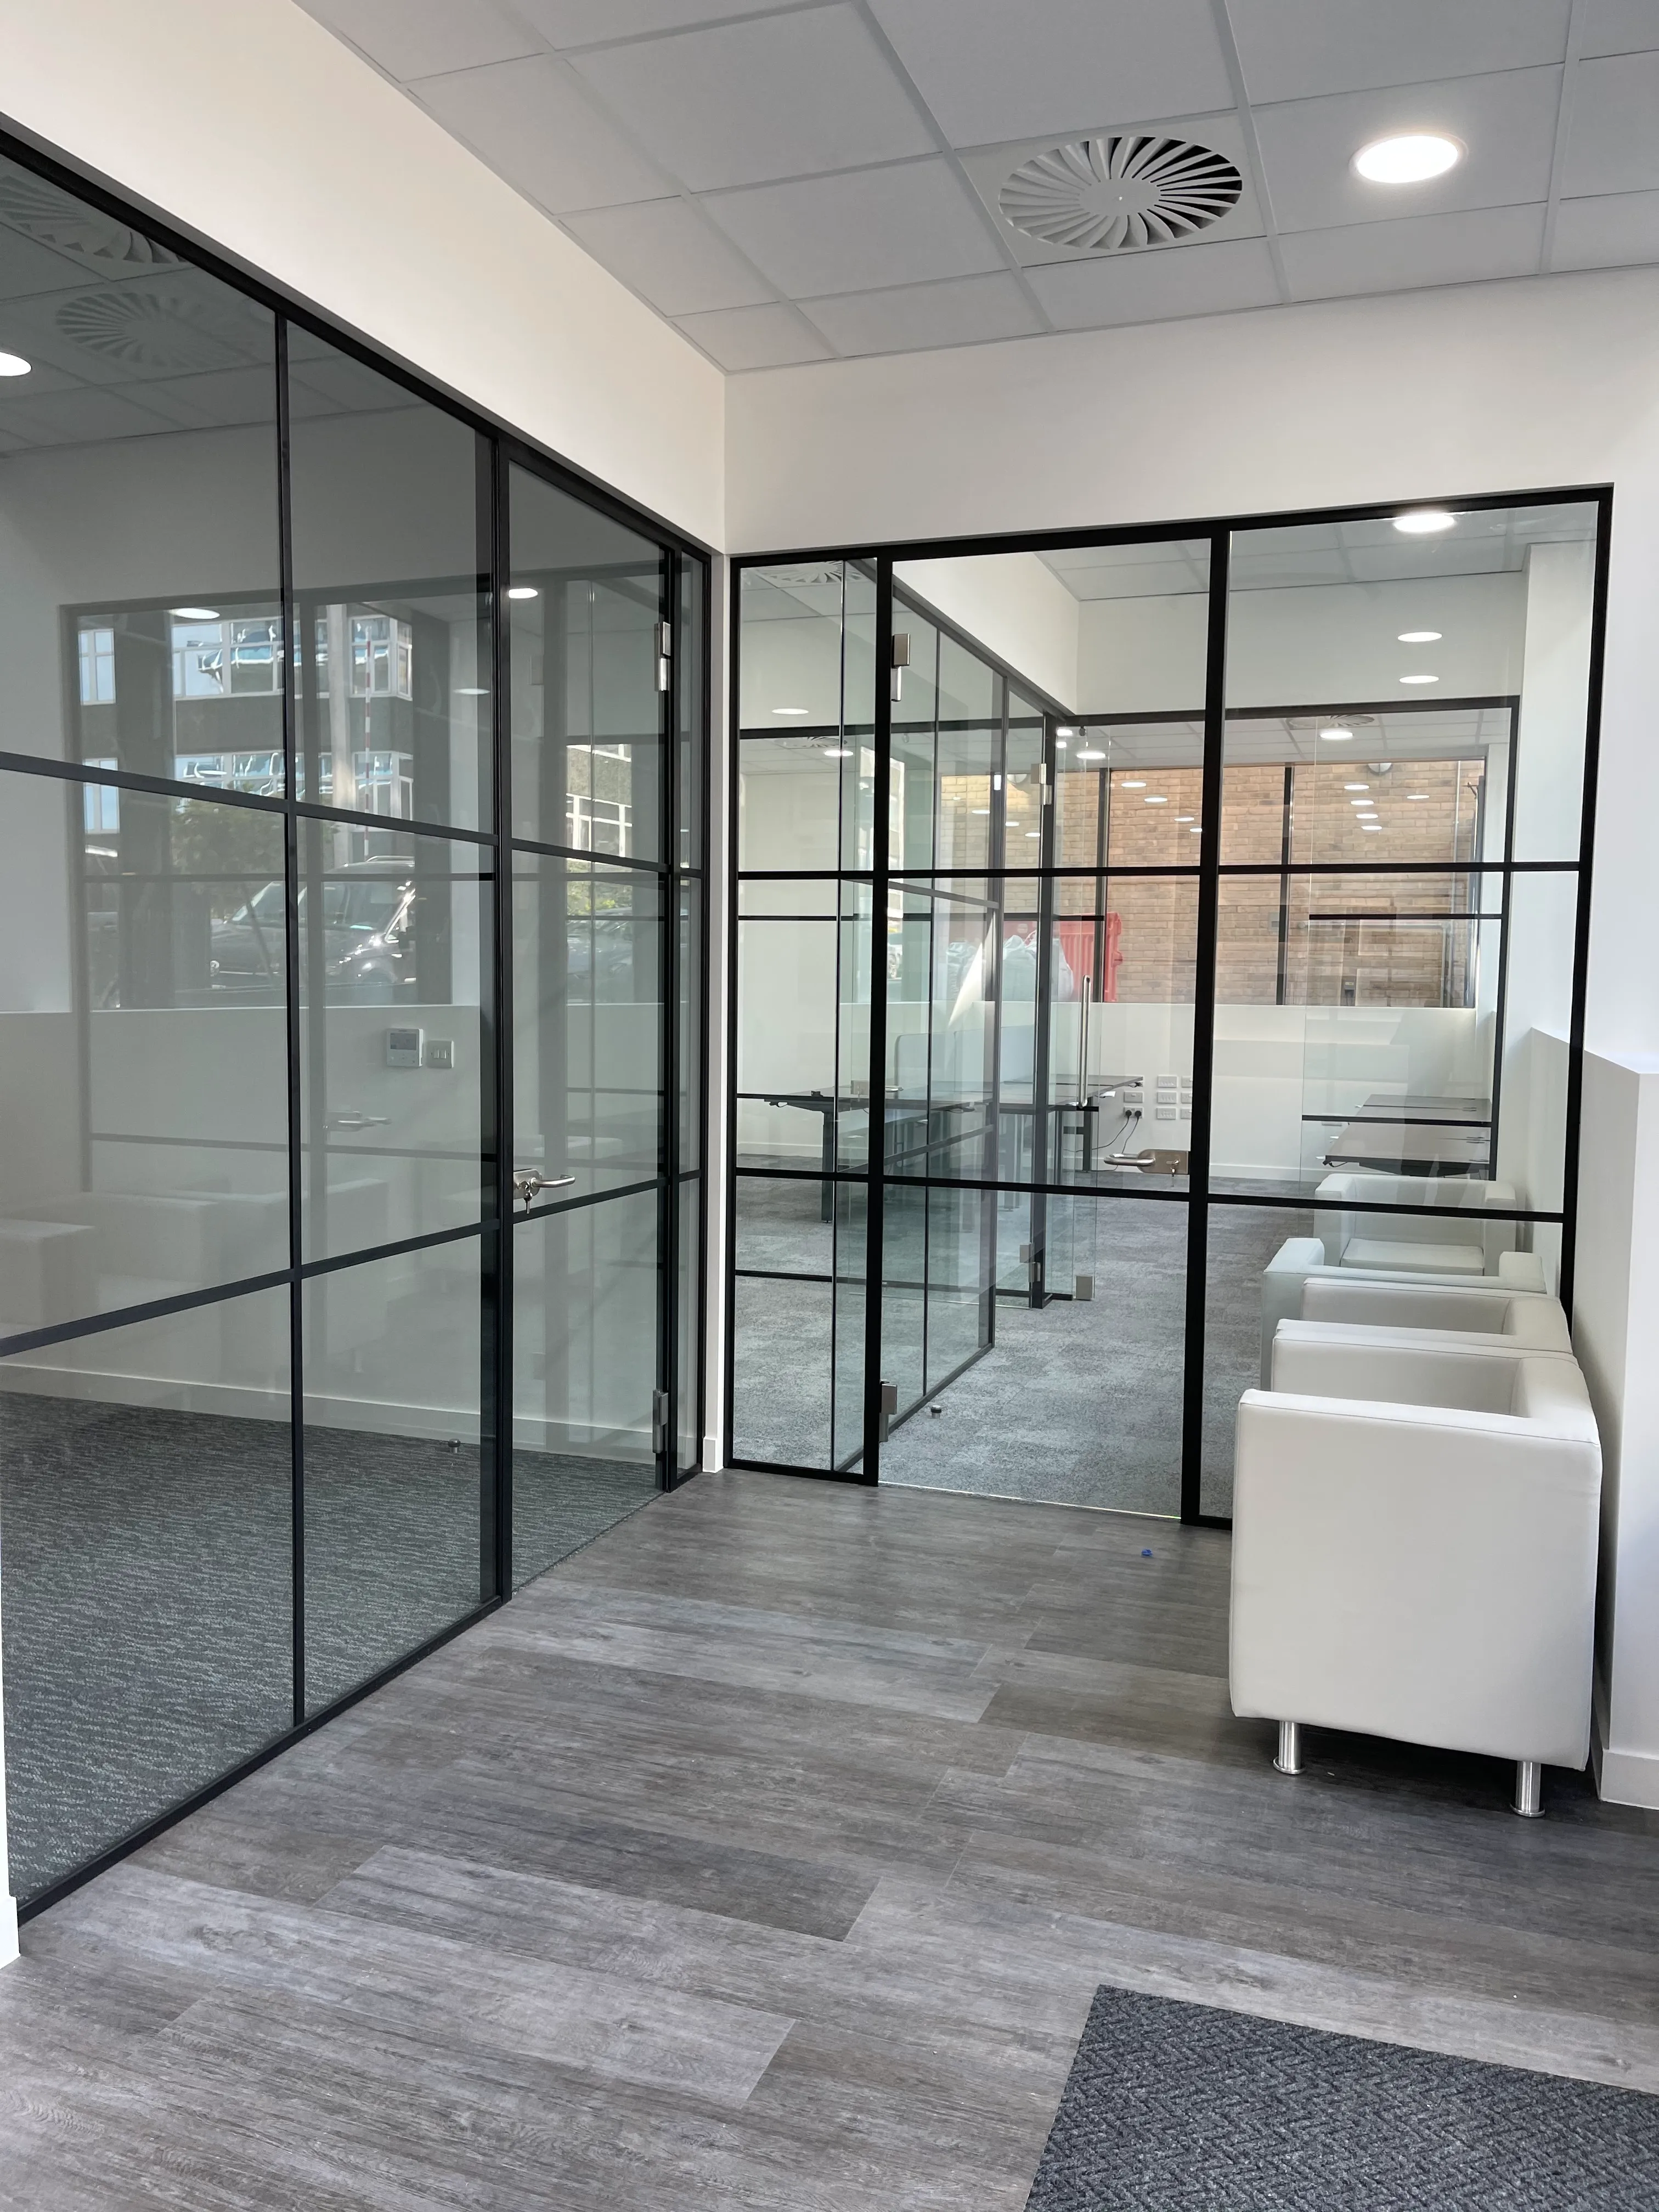 Breakout area with black framed glass partitions